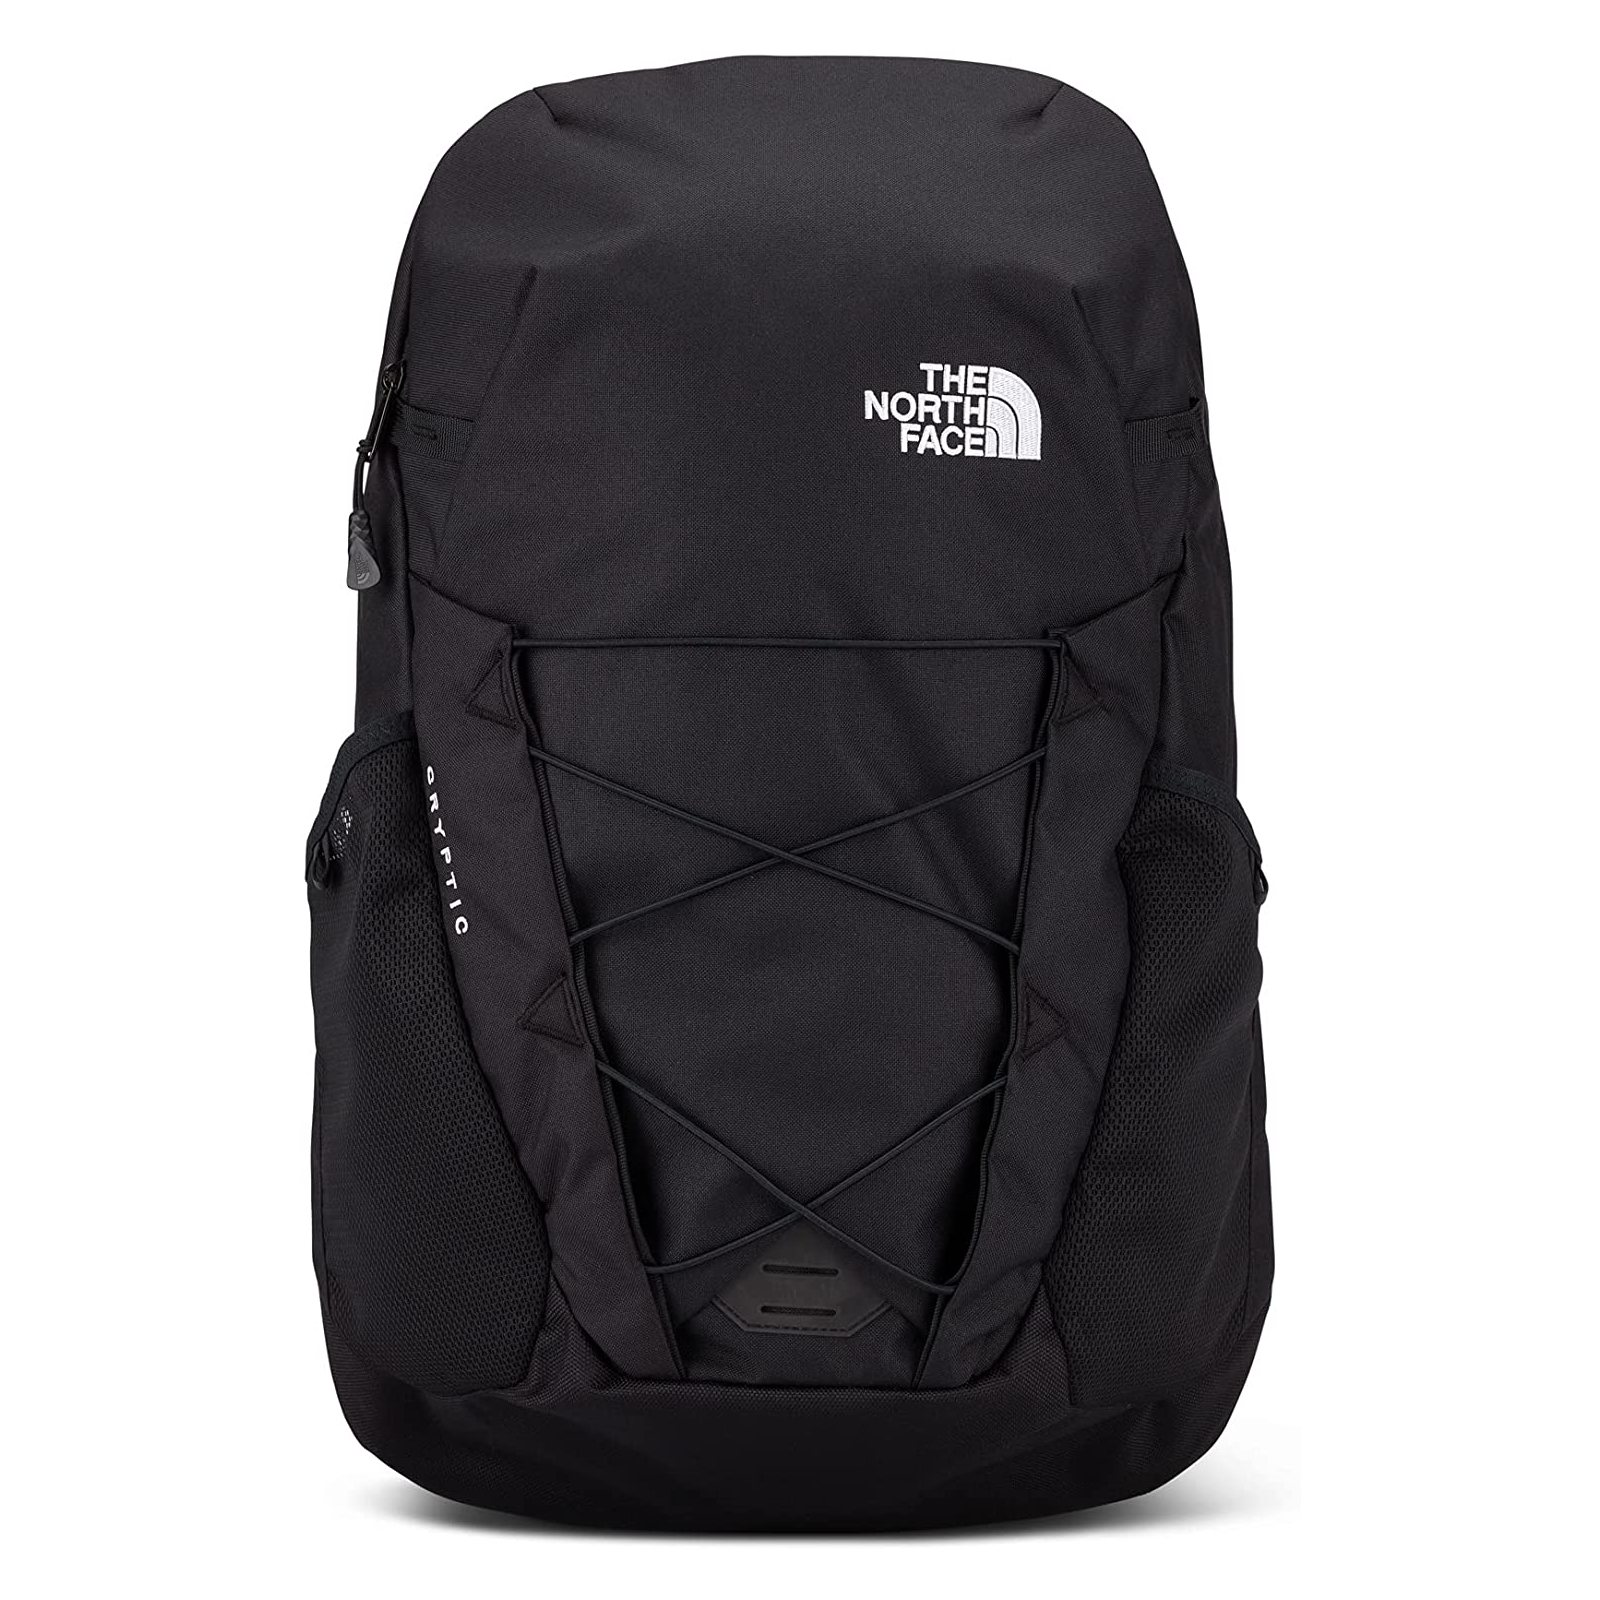 The North Face Cryptic Backpack Front View